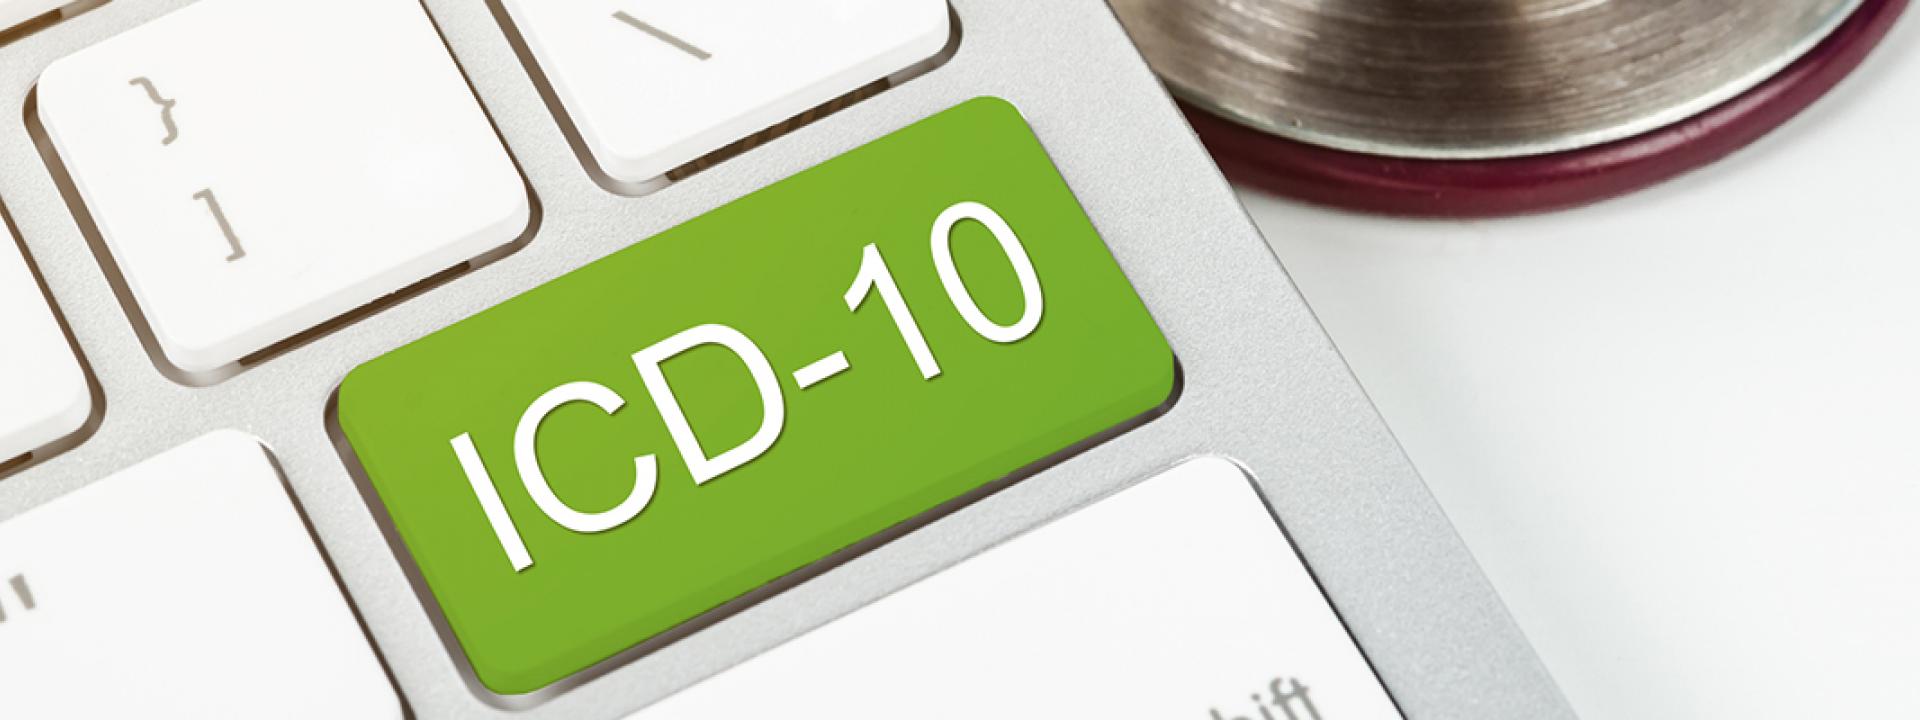 ICD button on keyboard